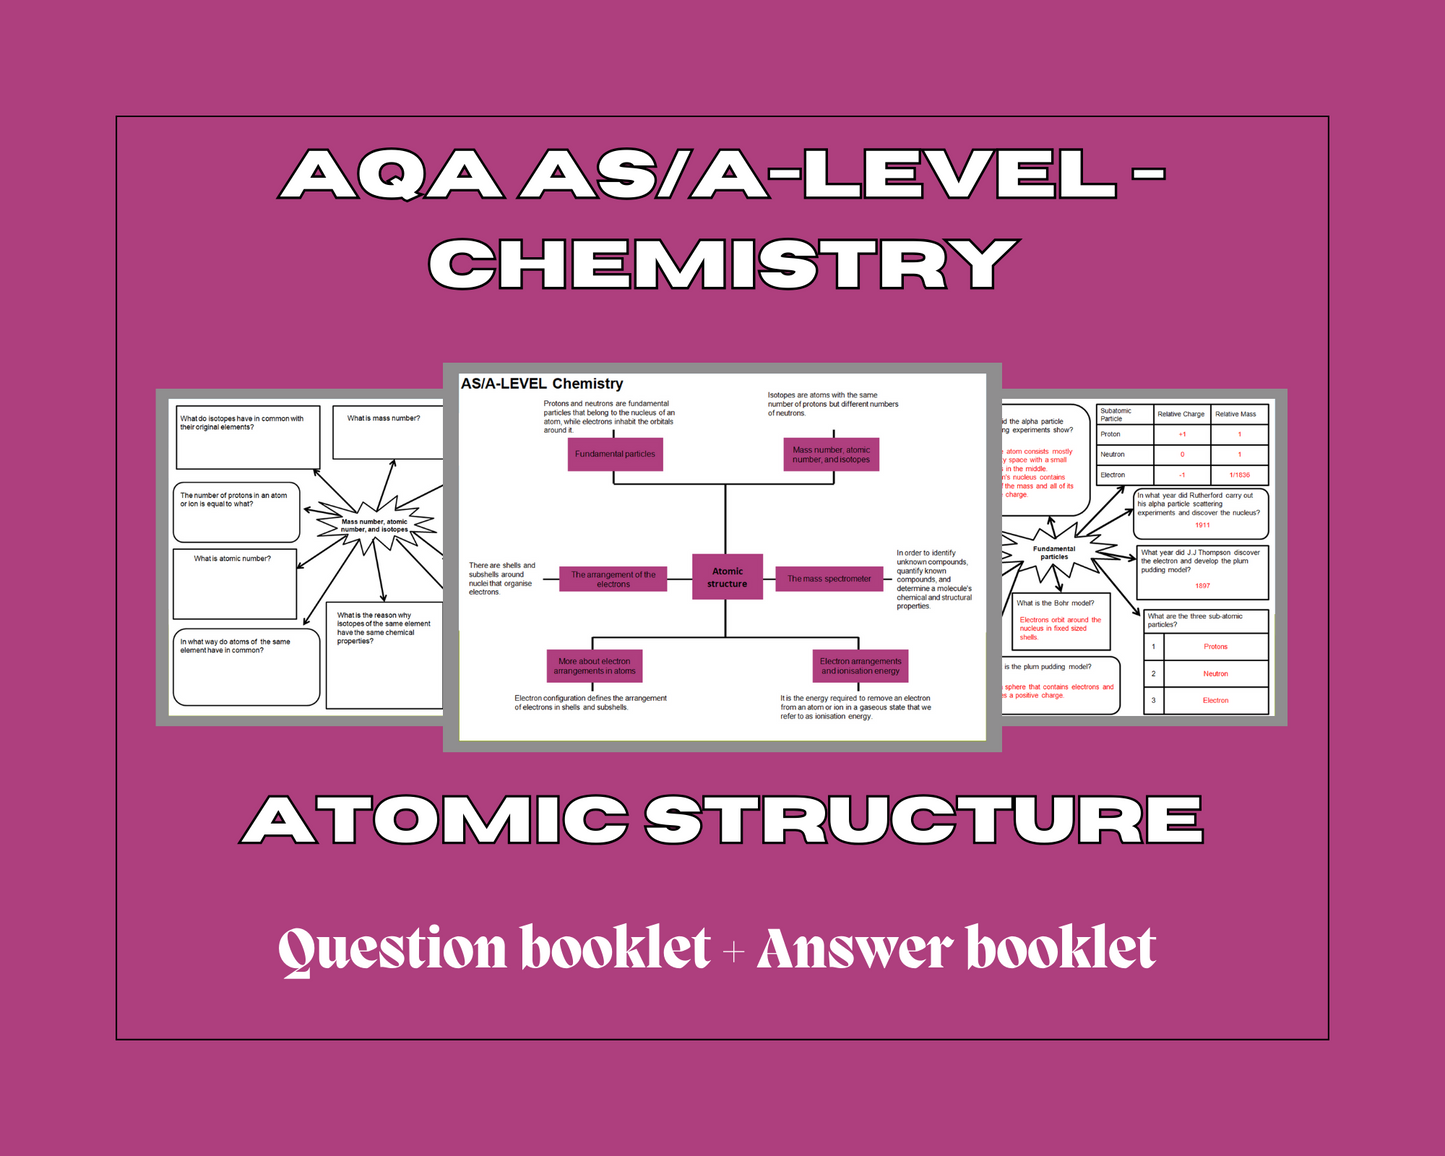 Atomic Structure - mind maps